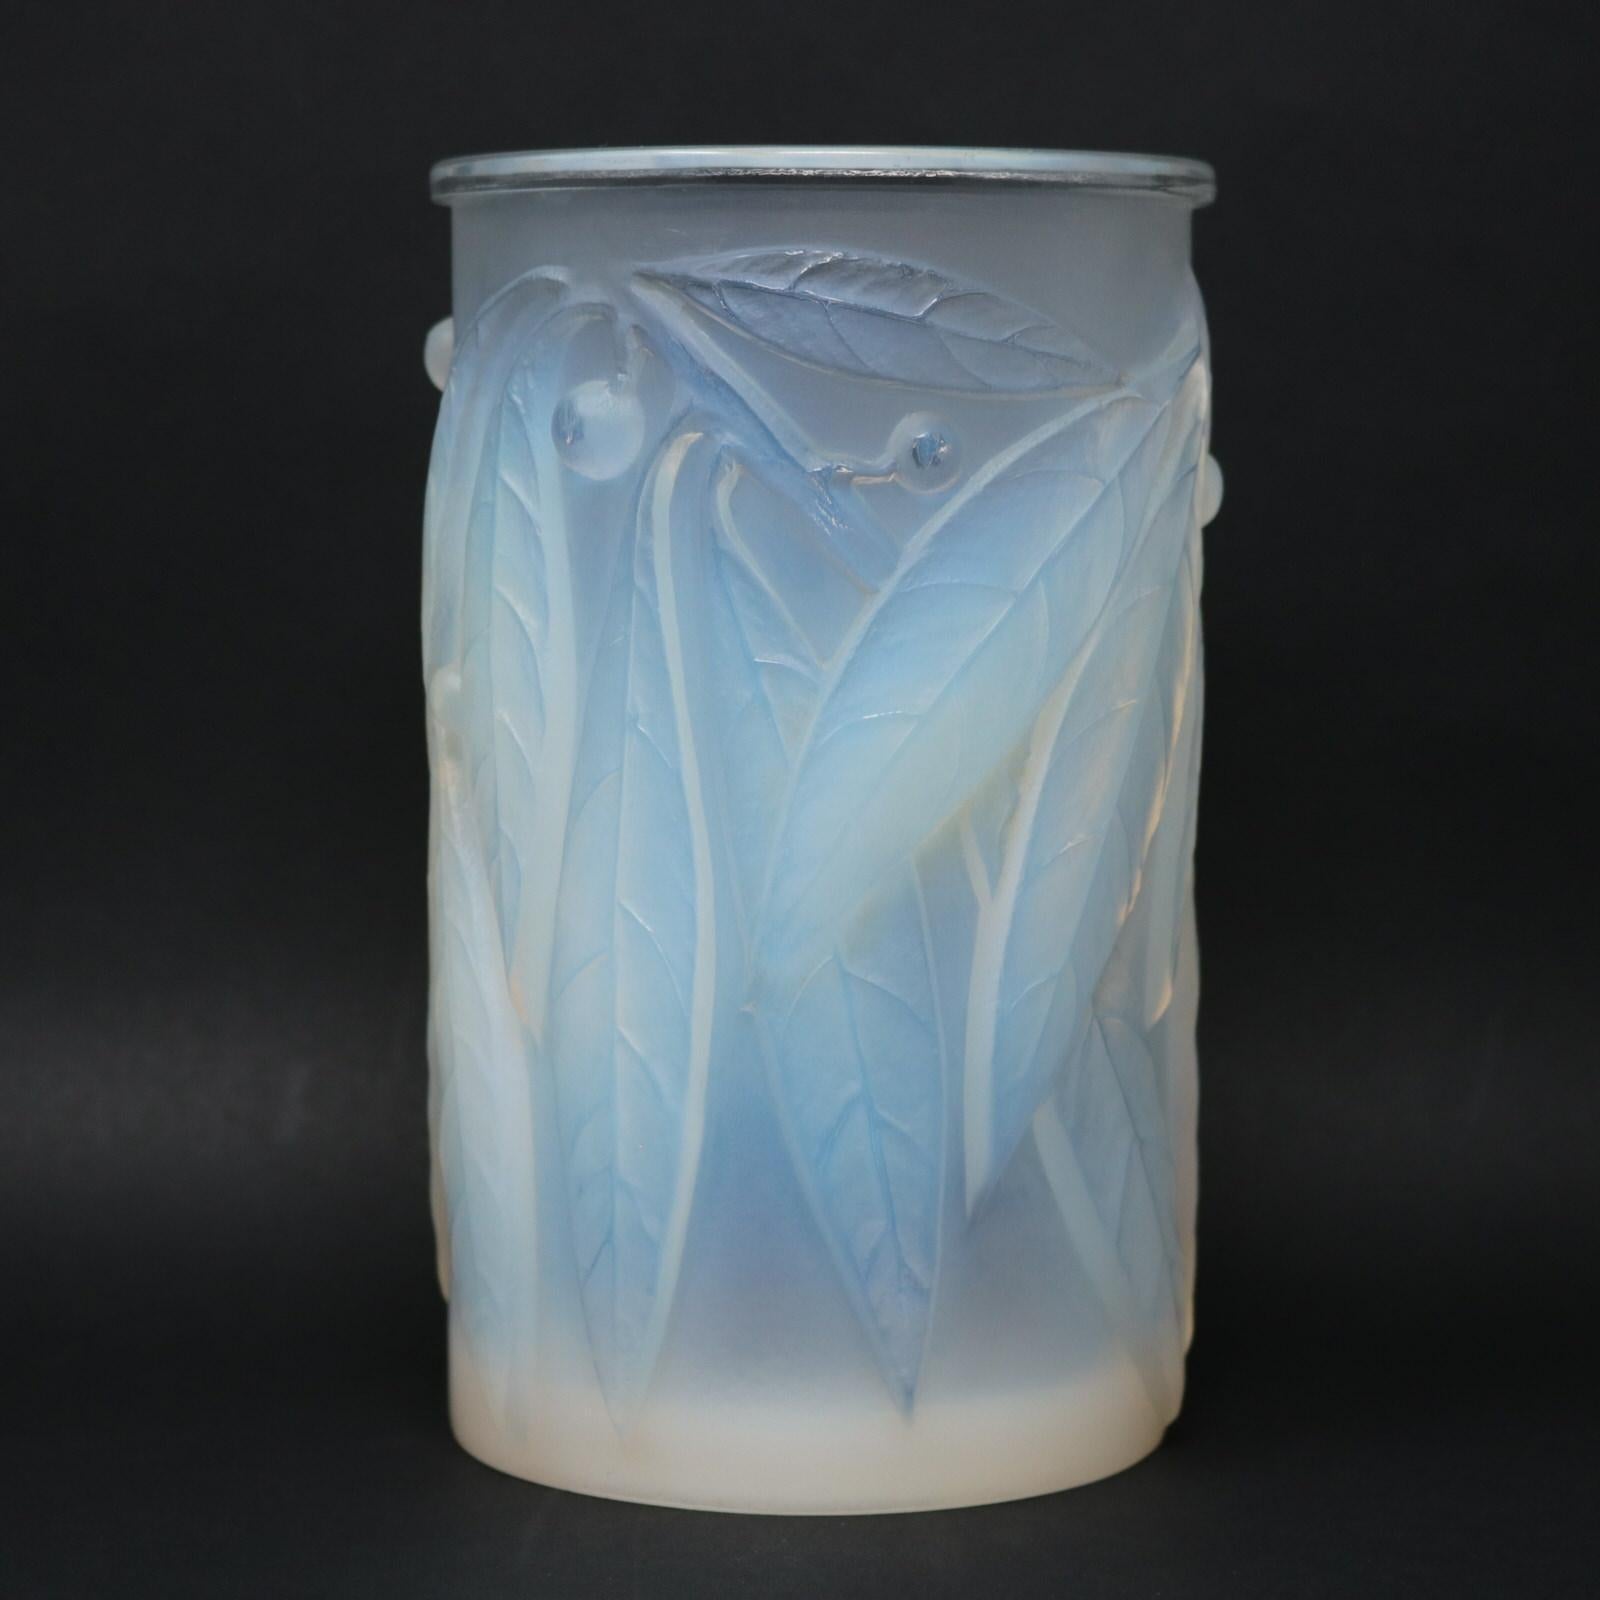 Rene Lalique opalescent glass 'Laurier' vase. This pattern features laurel leaves and berries. Makers mark, 'R LALIQUE FRANCE' wheel cut to side. Engraved, 'No 947' pattern number to the underside. Book reference: Marcilhac 947.